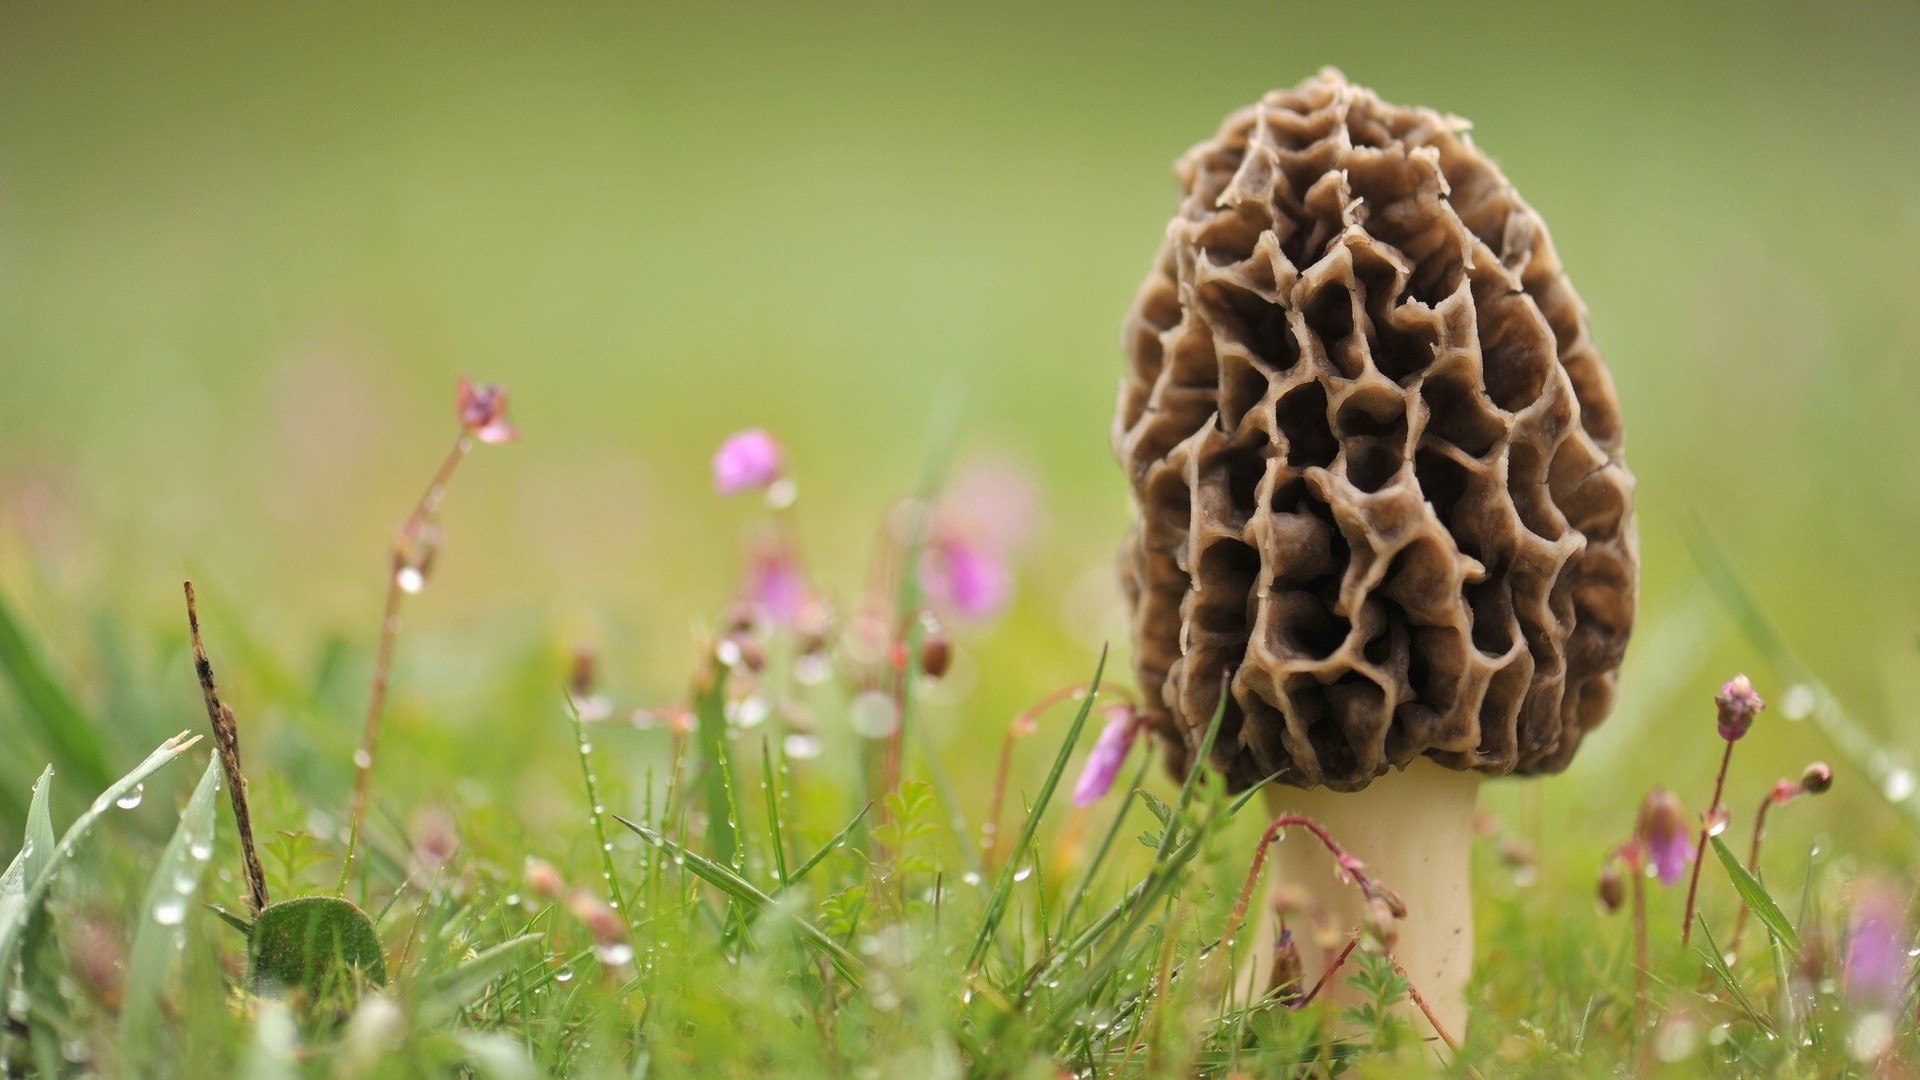 Morel mushroom wallpapers and images - wallpapers, pictures, photos